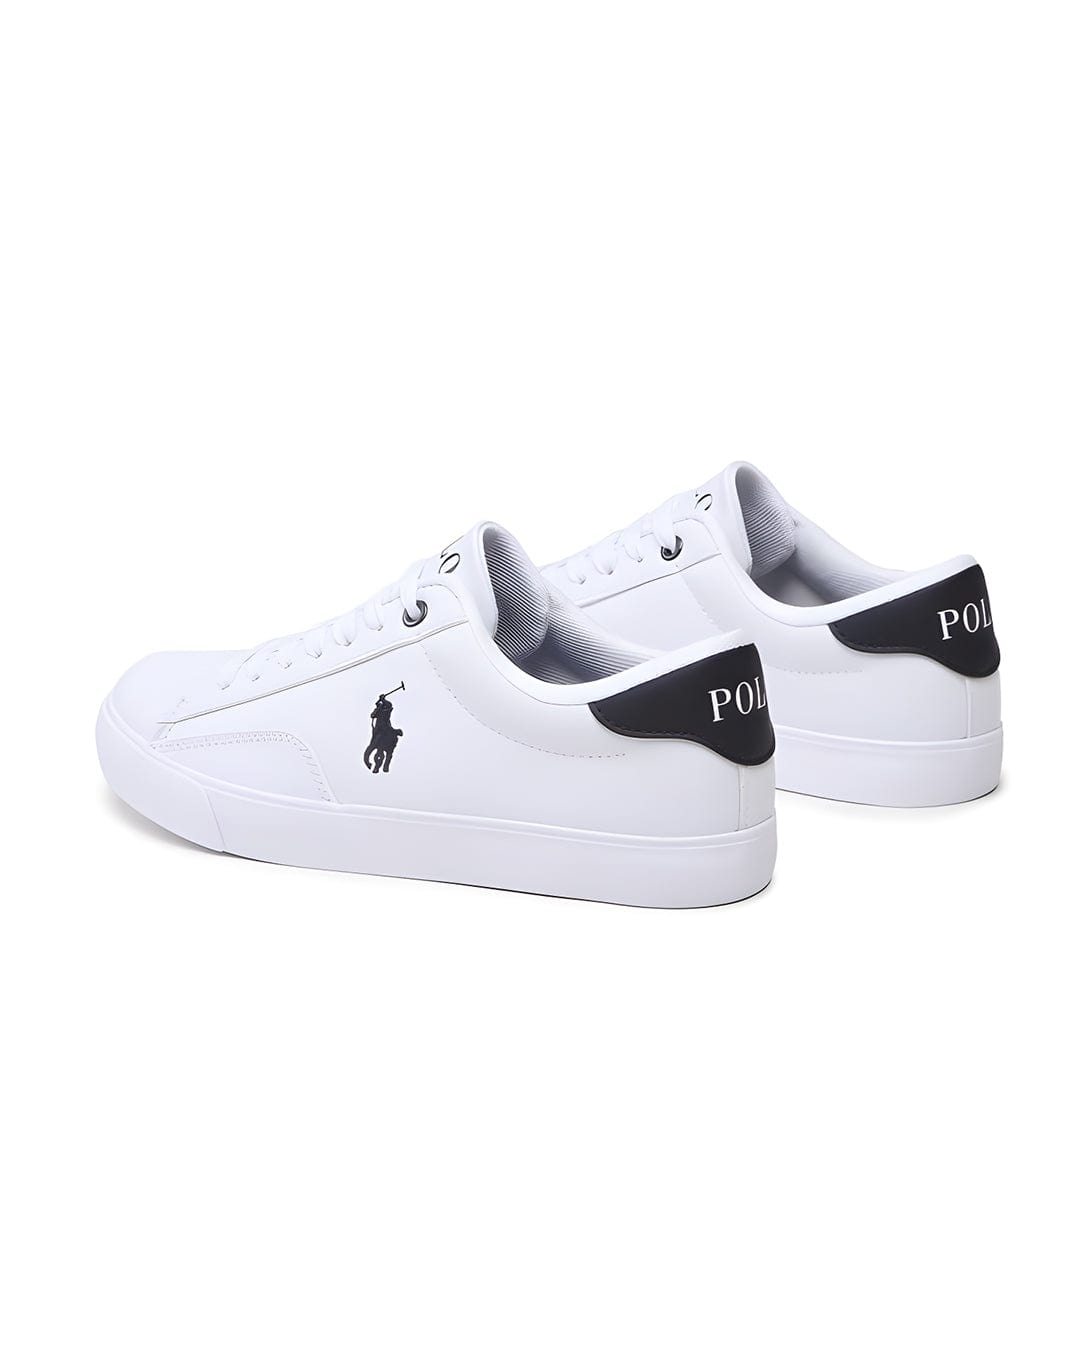 Polo Ralph Lauren Shoes Boys Polo Ralph Lauren White And Navy Theron Sneakers